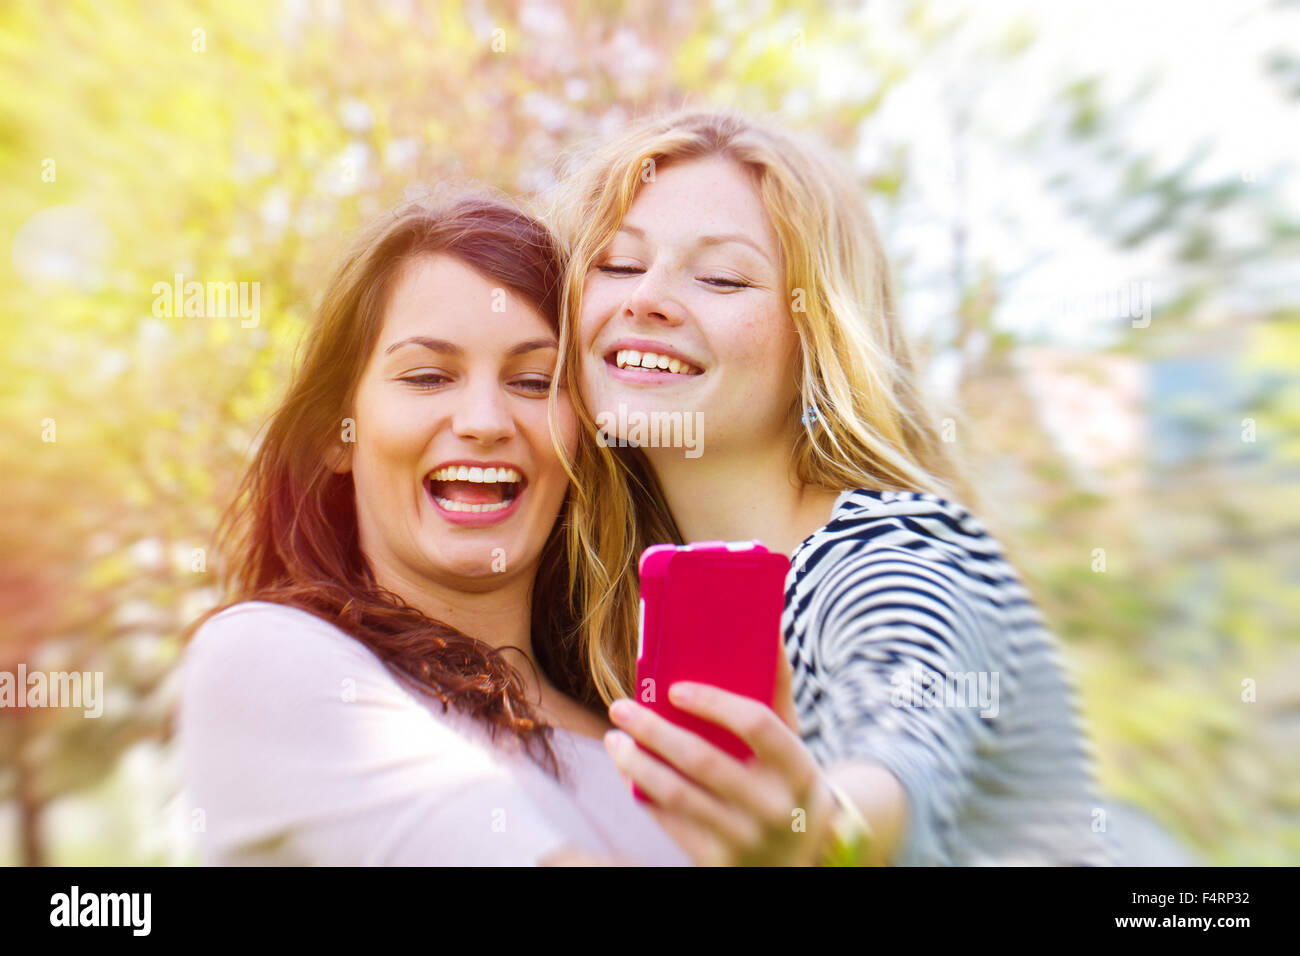 Two  girls taking Selfie with Smartphone Stock Photo